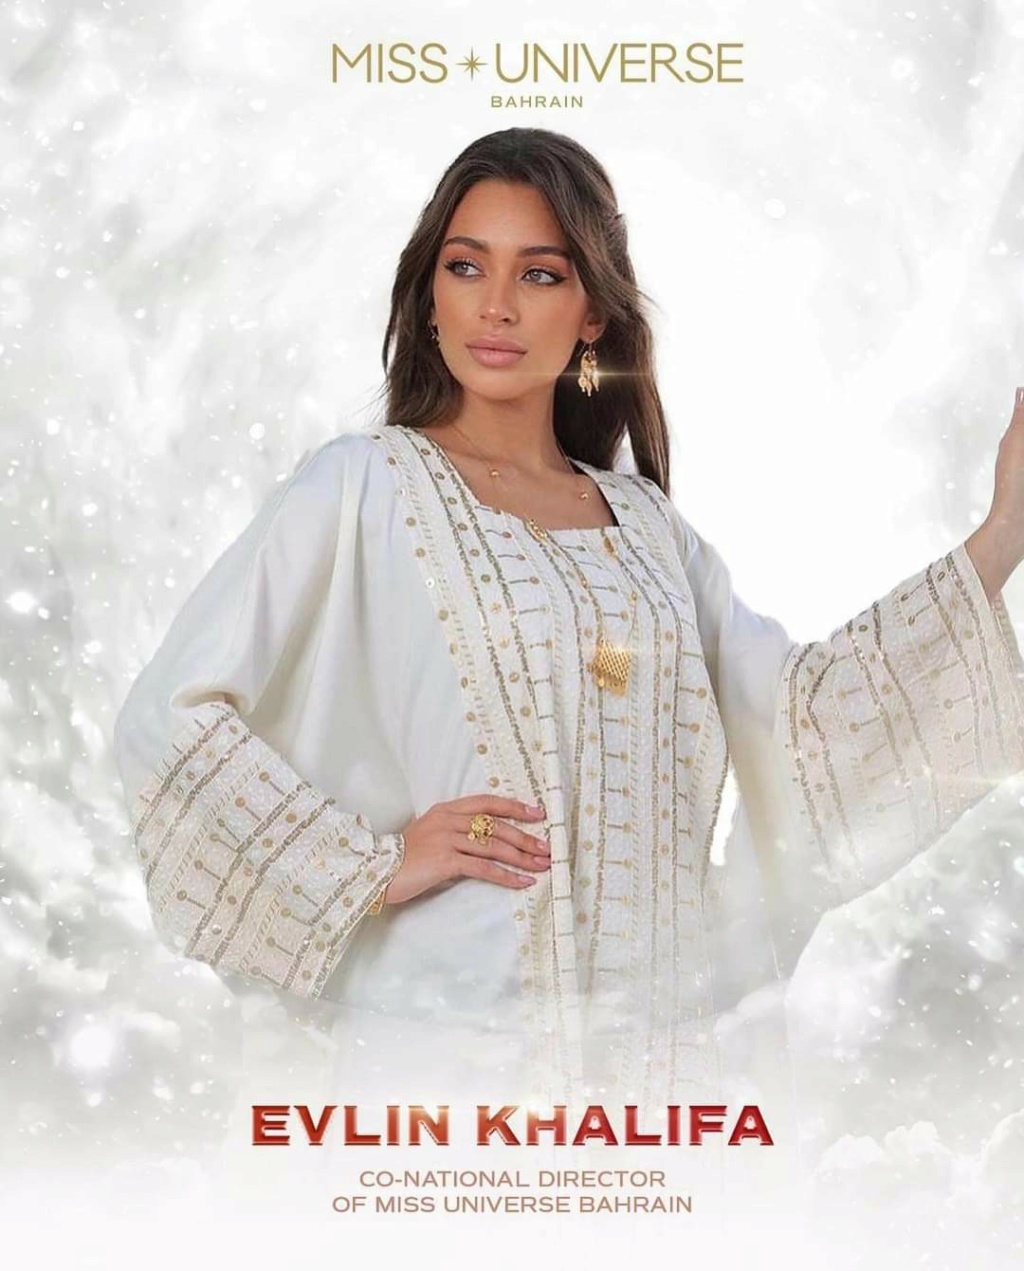 Evlin Abdullah Khalifa is now the Co- National Director of Miss Universe Bahrain Fb_i7391